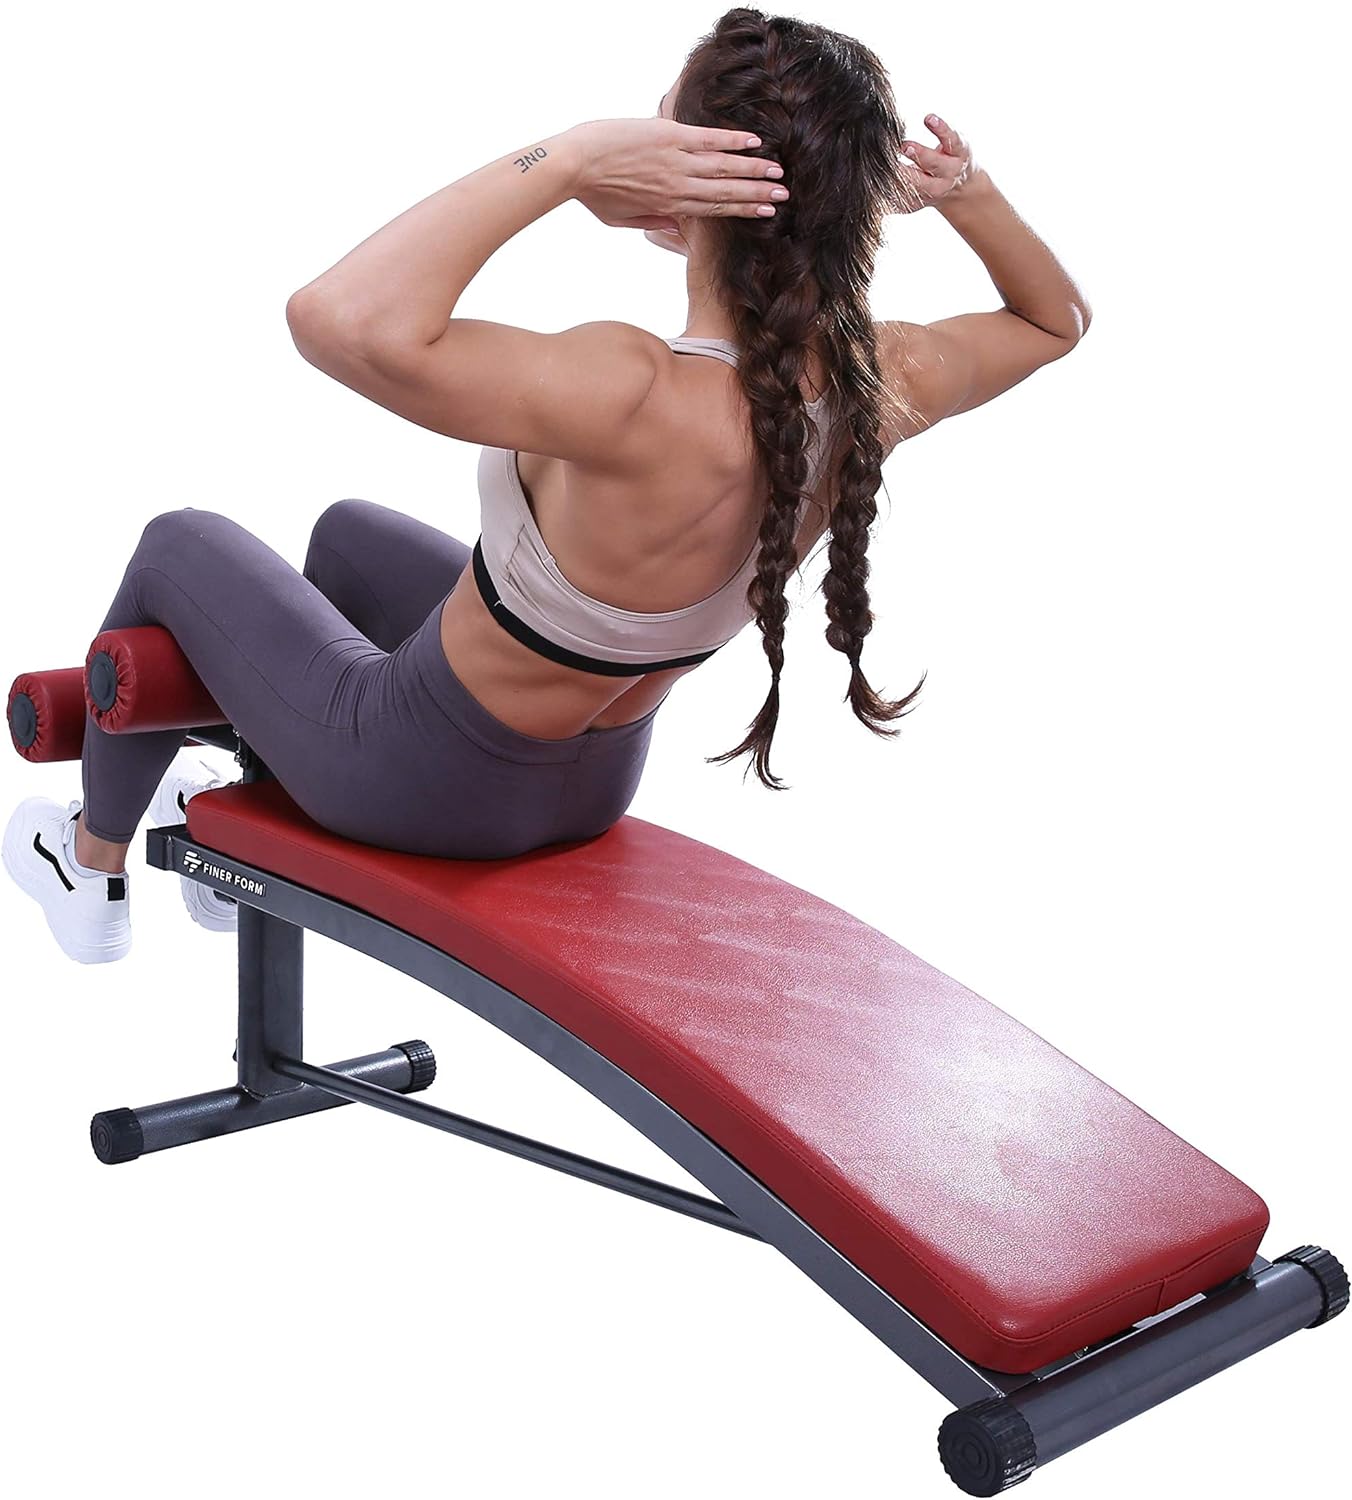 Finer Form Gym-Quality Sit Up Bench with Reverse Crunch Handle - Solid Ab Workout Equipment for Your Home Gym. More Effective than an Ab Machine or Ab Roller. Get Abdominal Gym Equipment Right in Your Home.